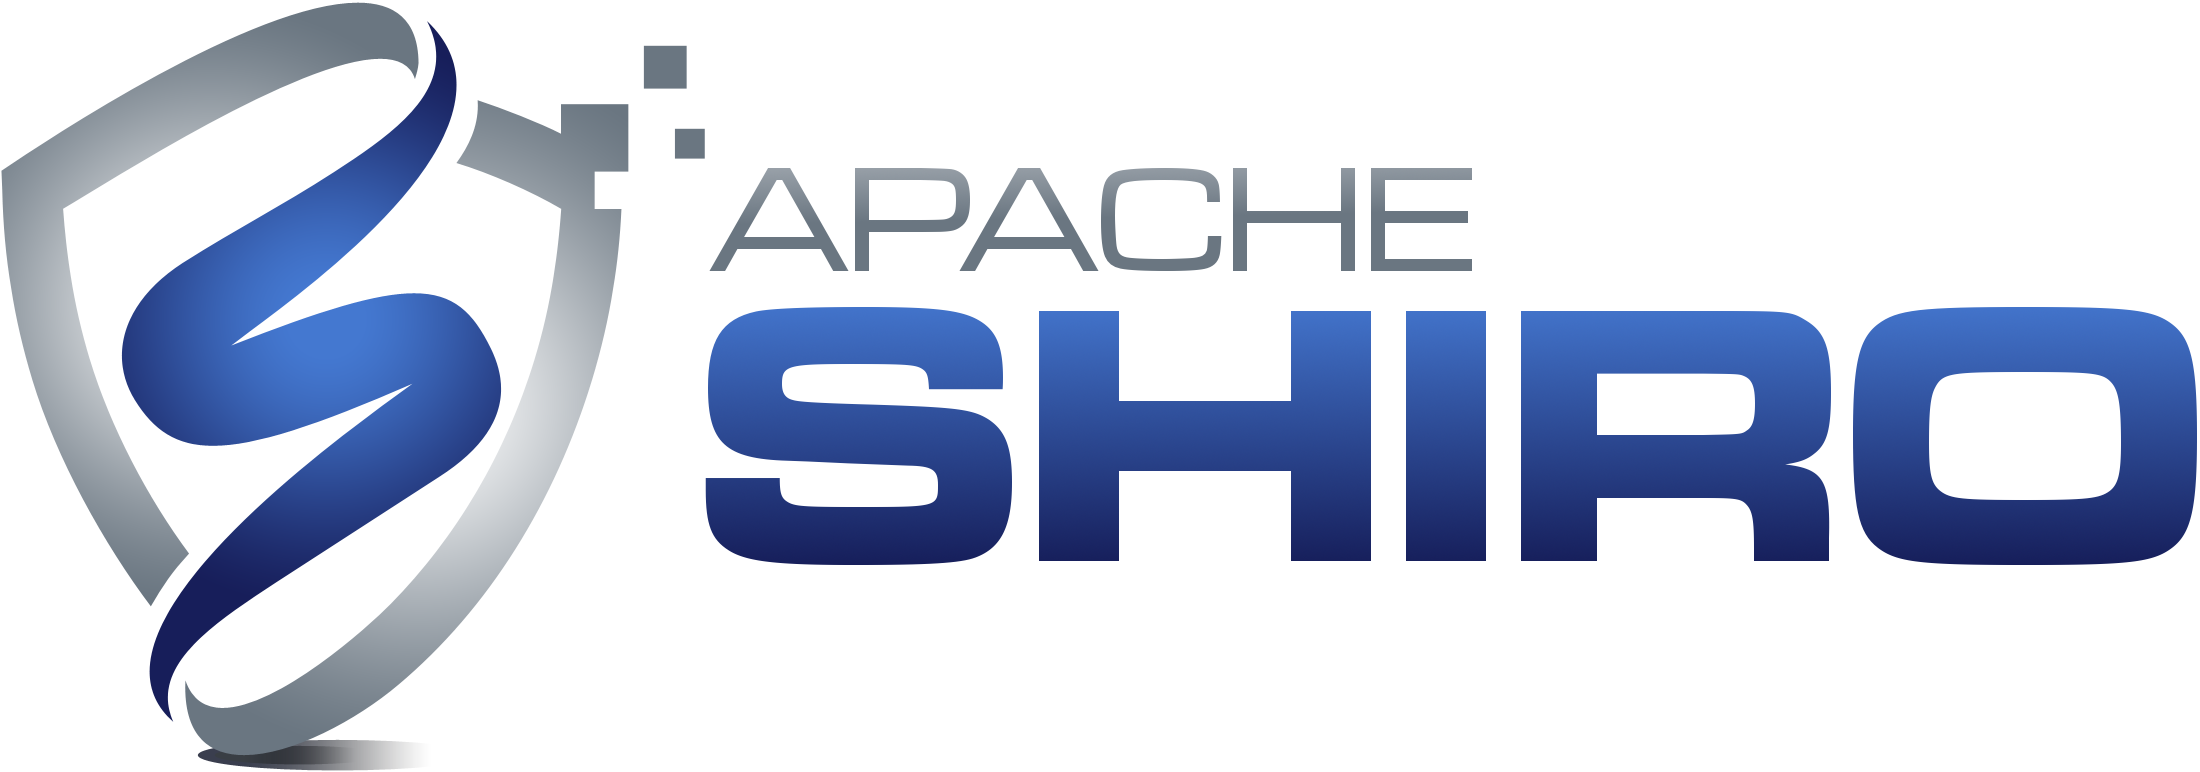 Featured image of Securing JAX-RS endpoints using Apache Shiro